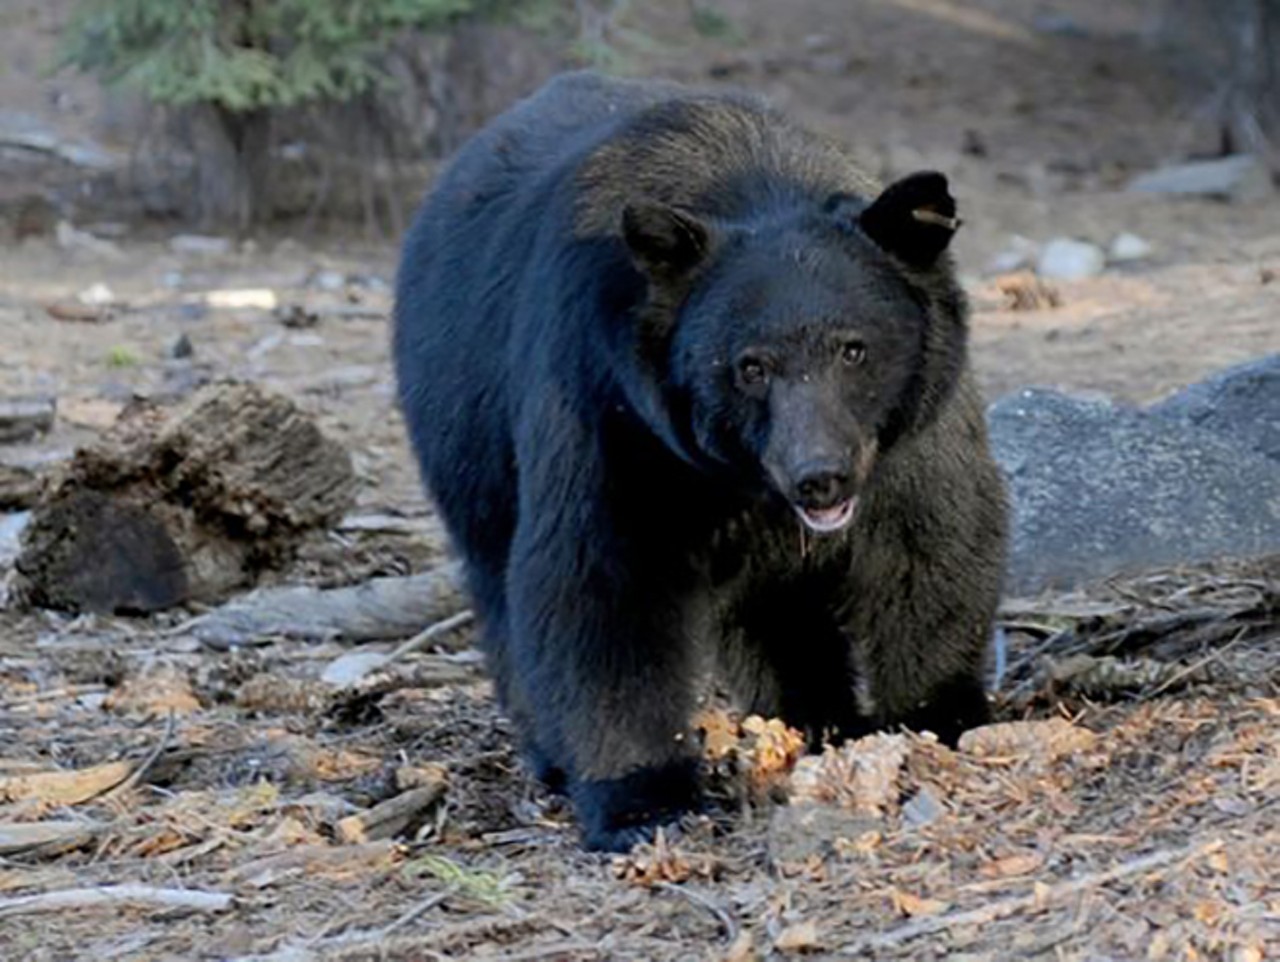 You could attempt to pet a 400 pound black bear in Dade County.
Photo via USA Today